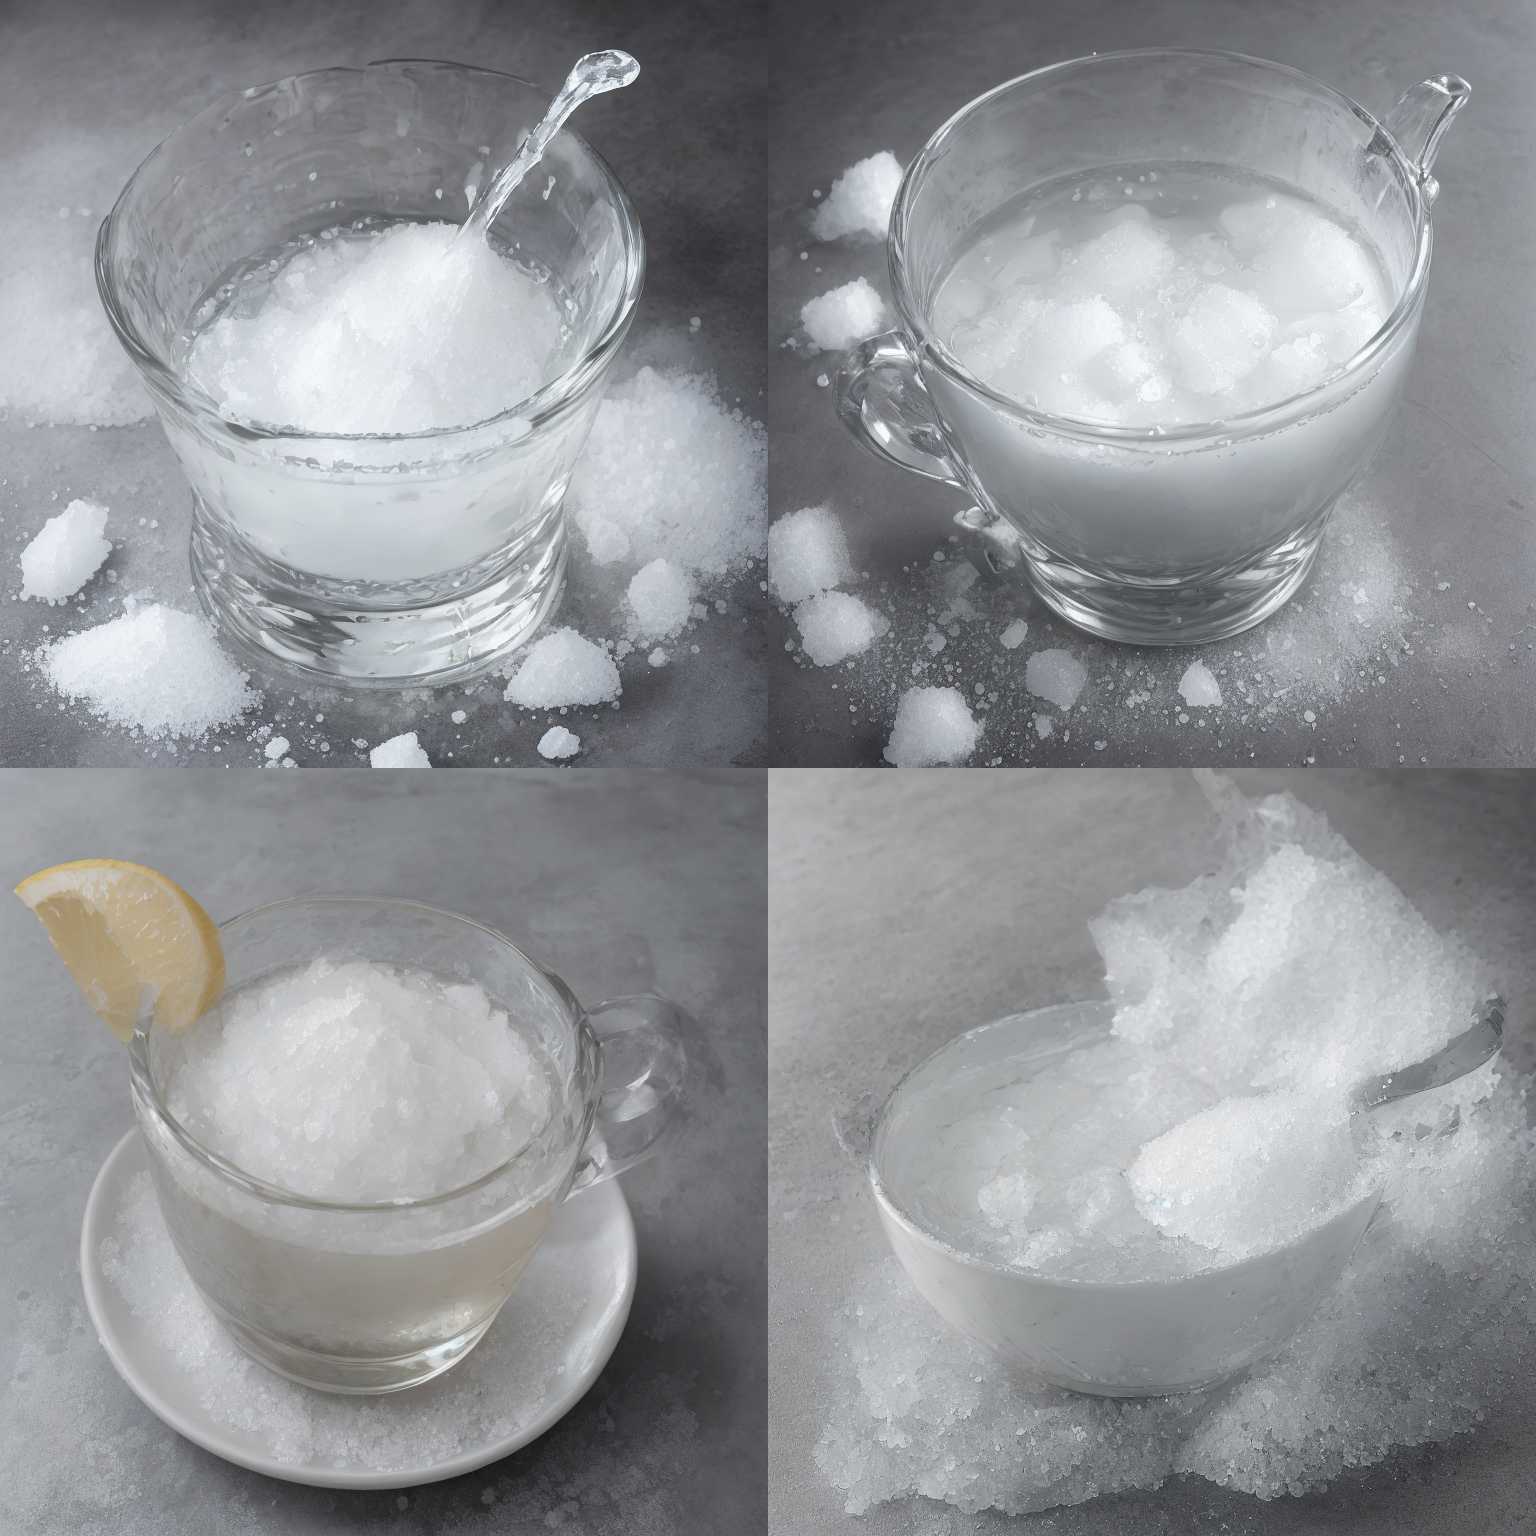 A cup of water with salt just added